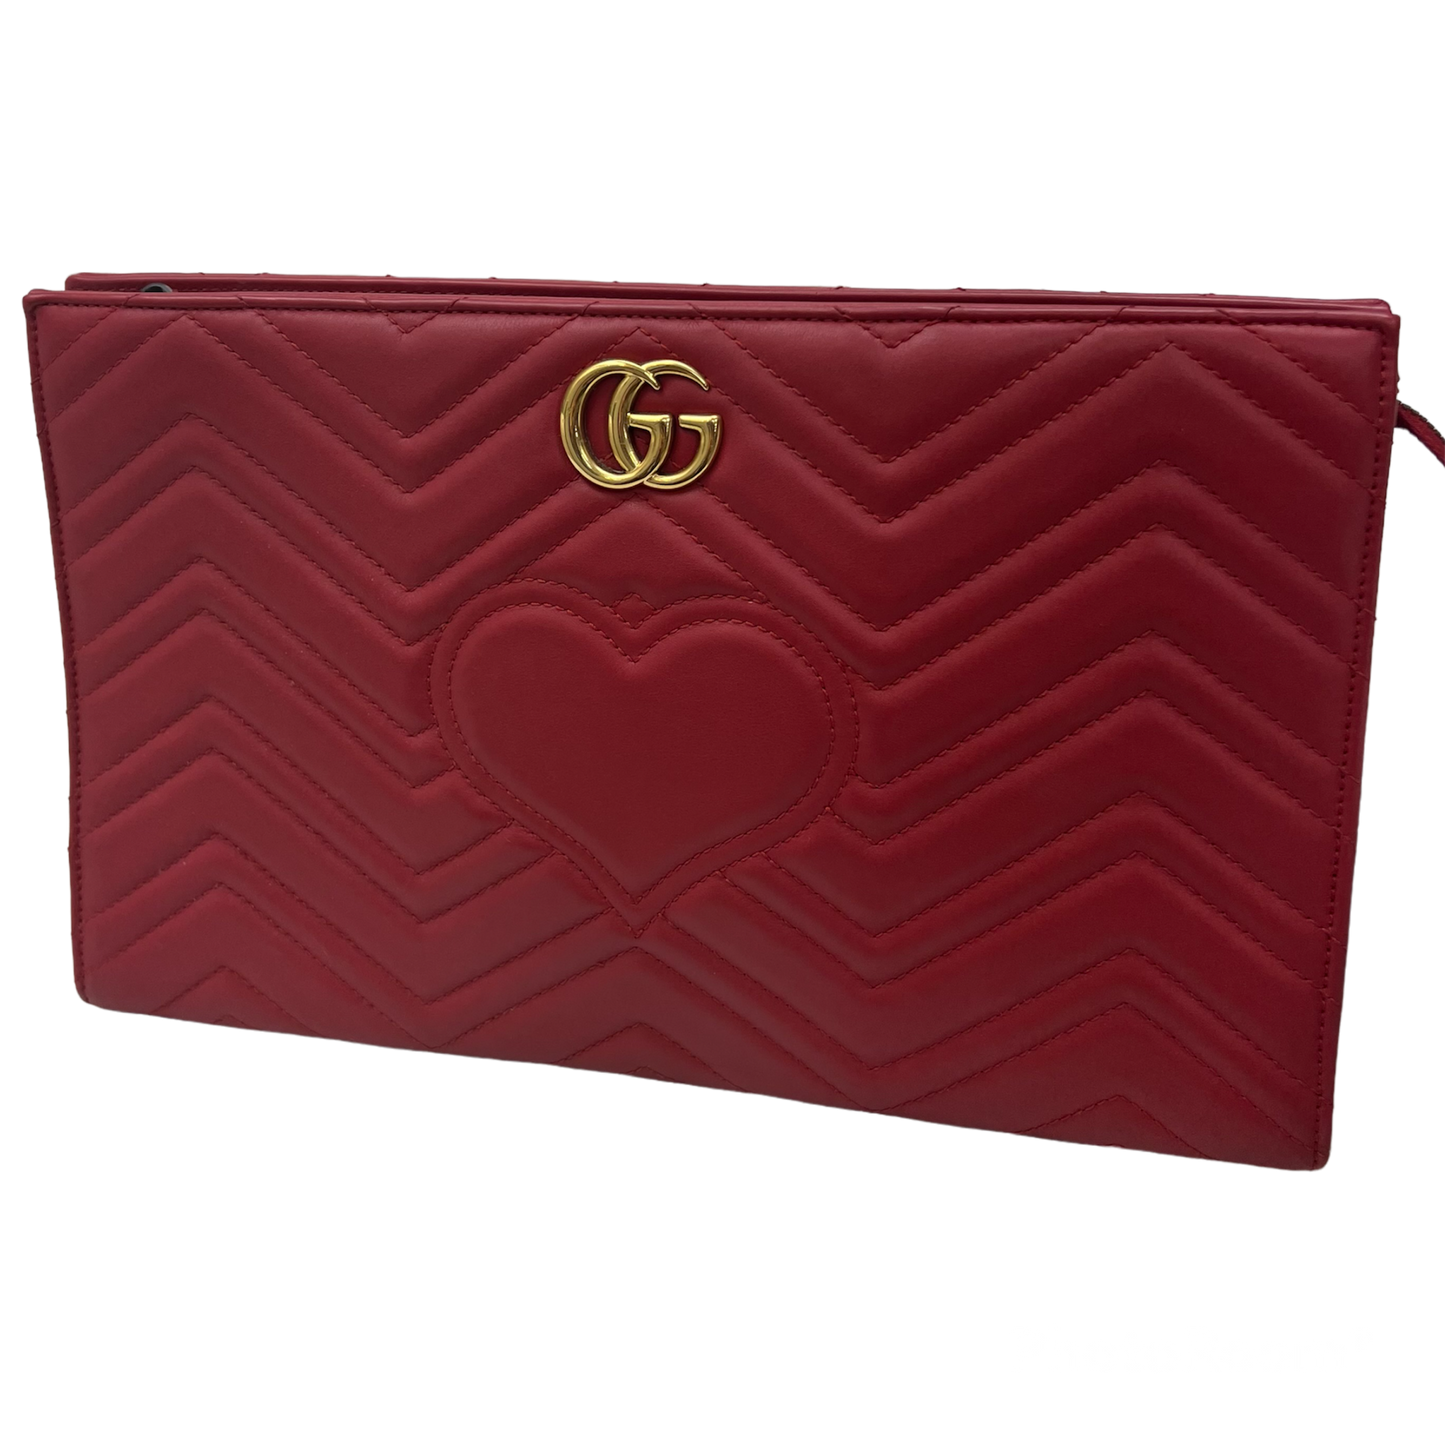 Gucci Red Marmont Clutch